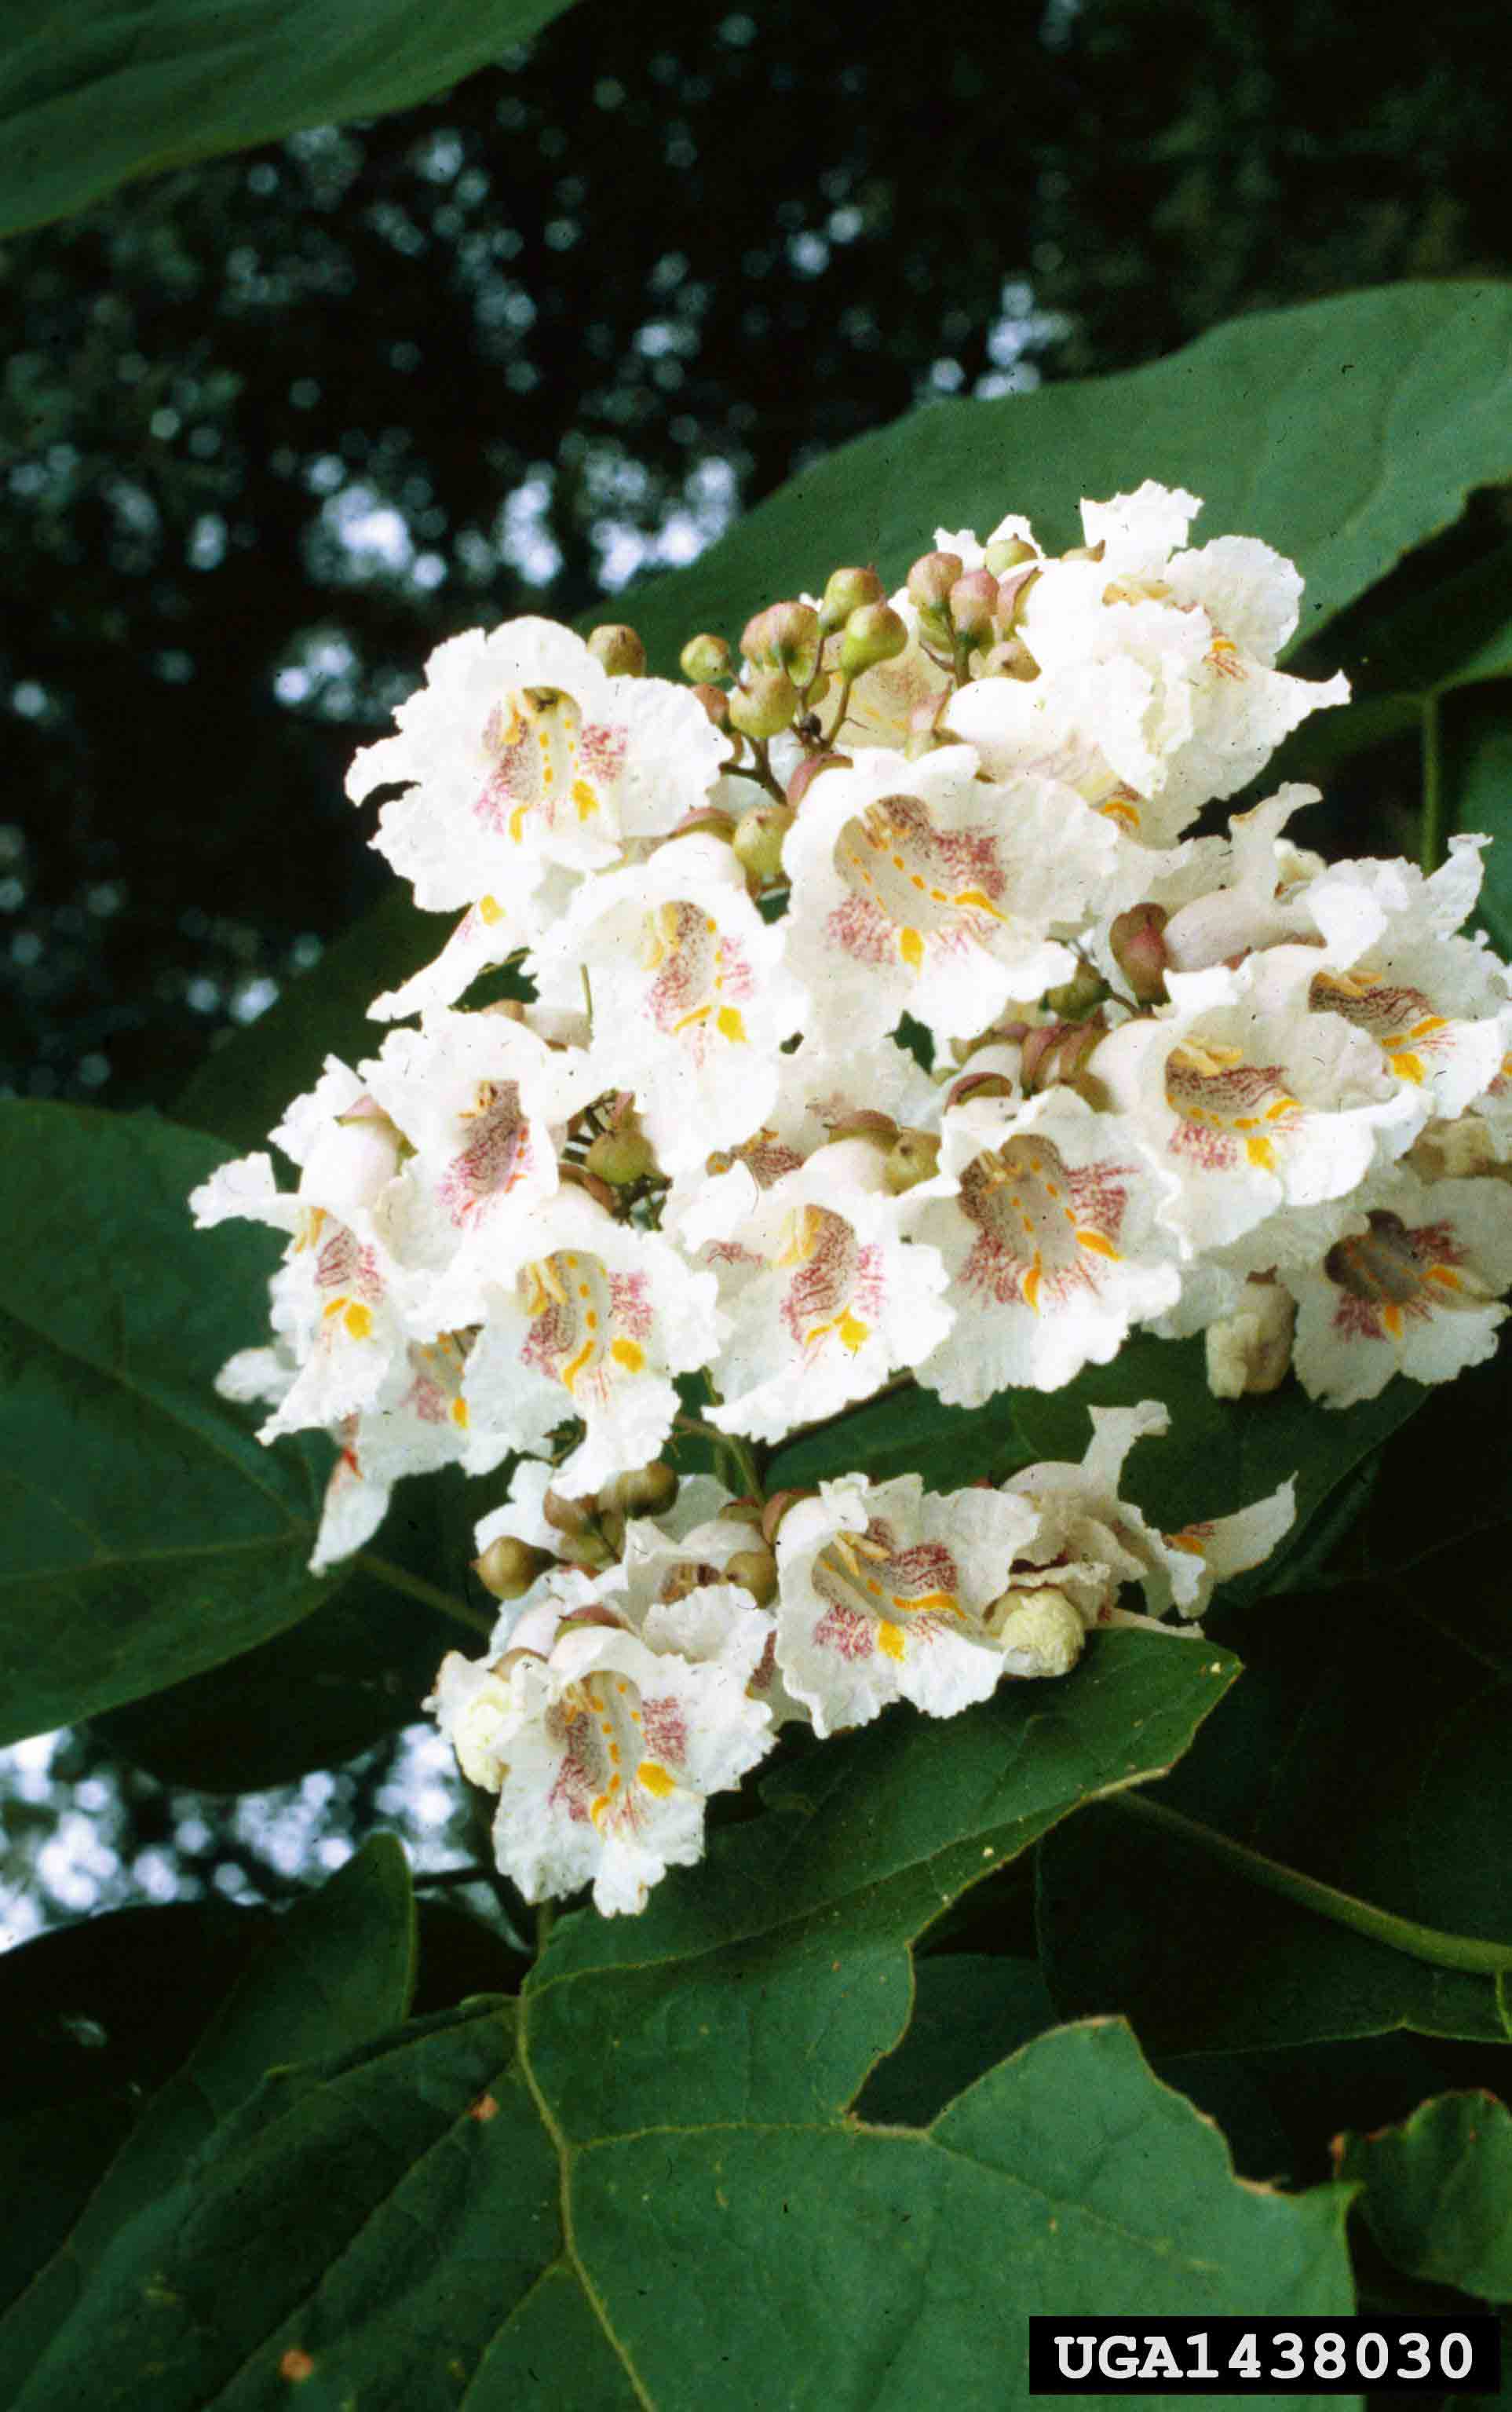 Southern catalpa flowers in cluster